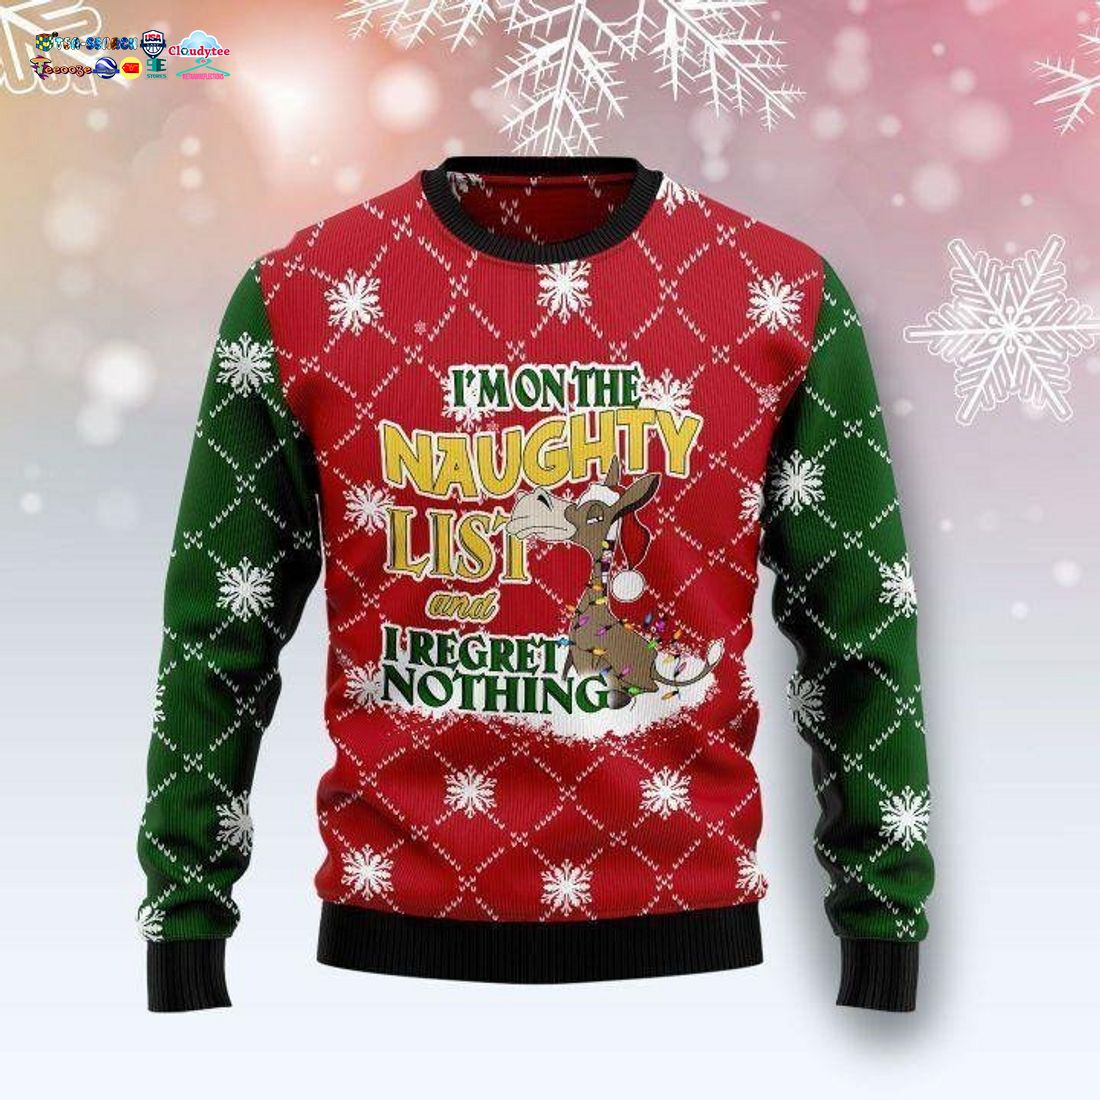 Donkey I'm On The Naughty List And I Regret Nothing Ugly Christmas Sweater